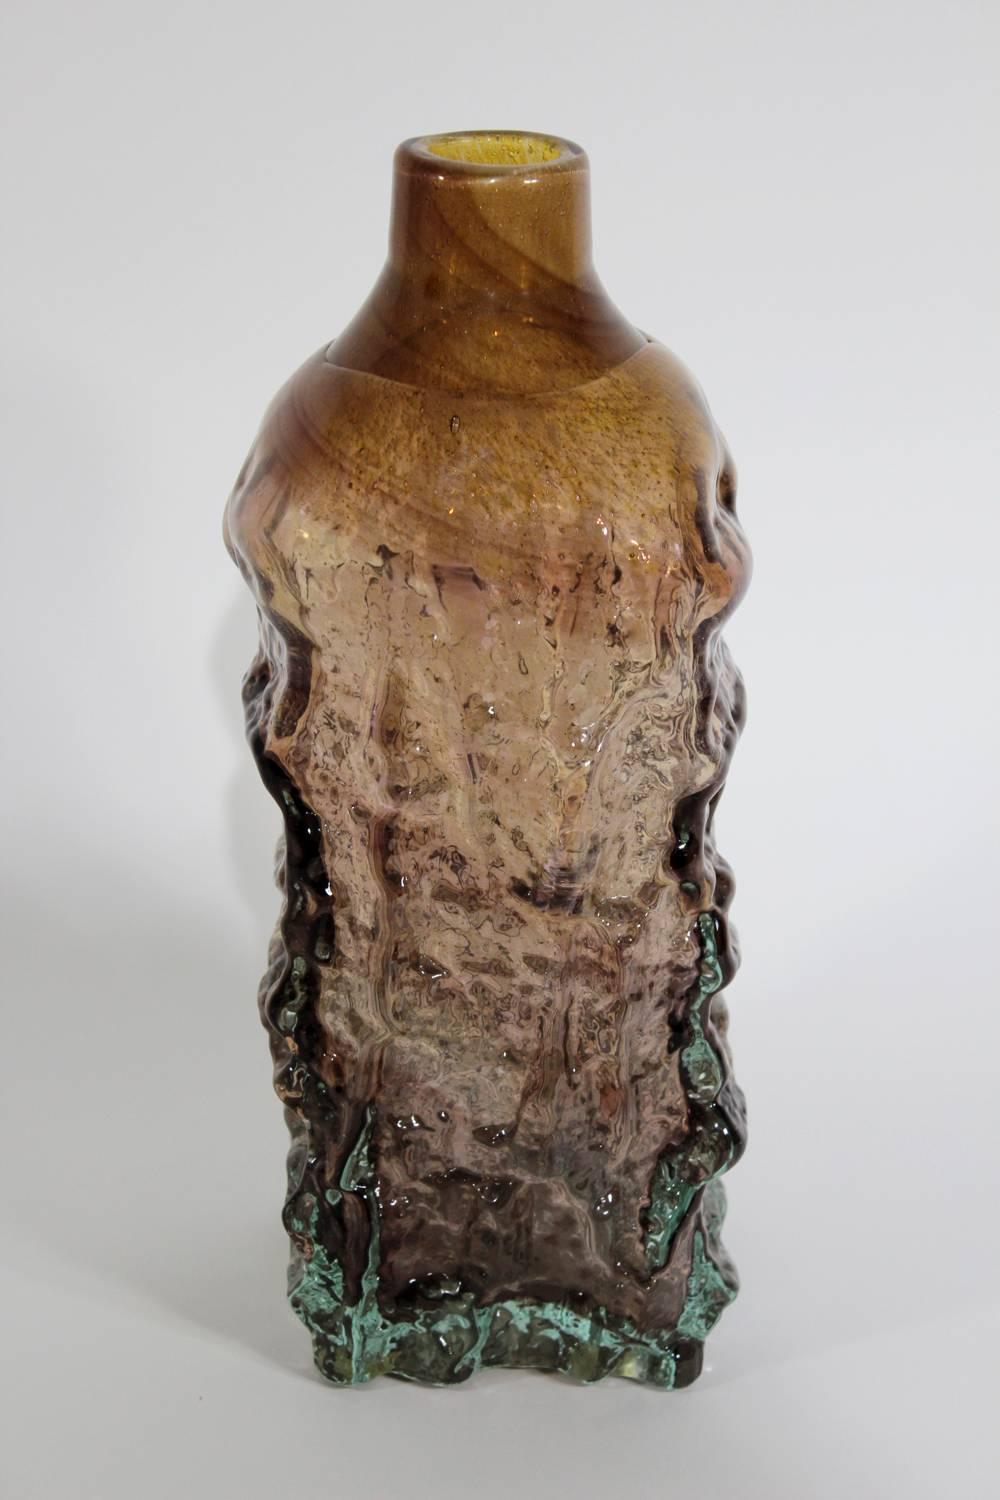 A large, heavy bark-textured bottle vase in cased glass designed by the innovative British industrial glass designer Michael Harris for Mdina Glass. Harris founded the company on the island of Malta in 1967 and was its principal designer until he